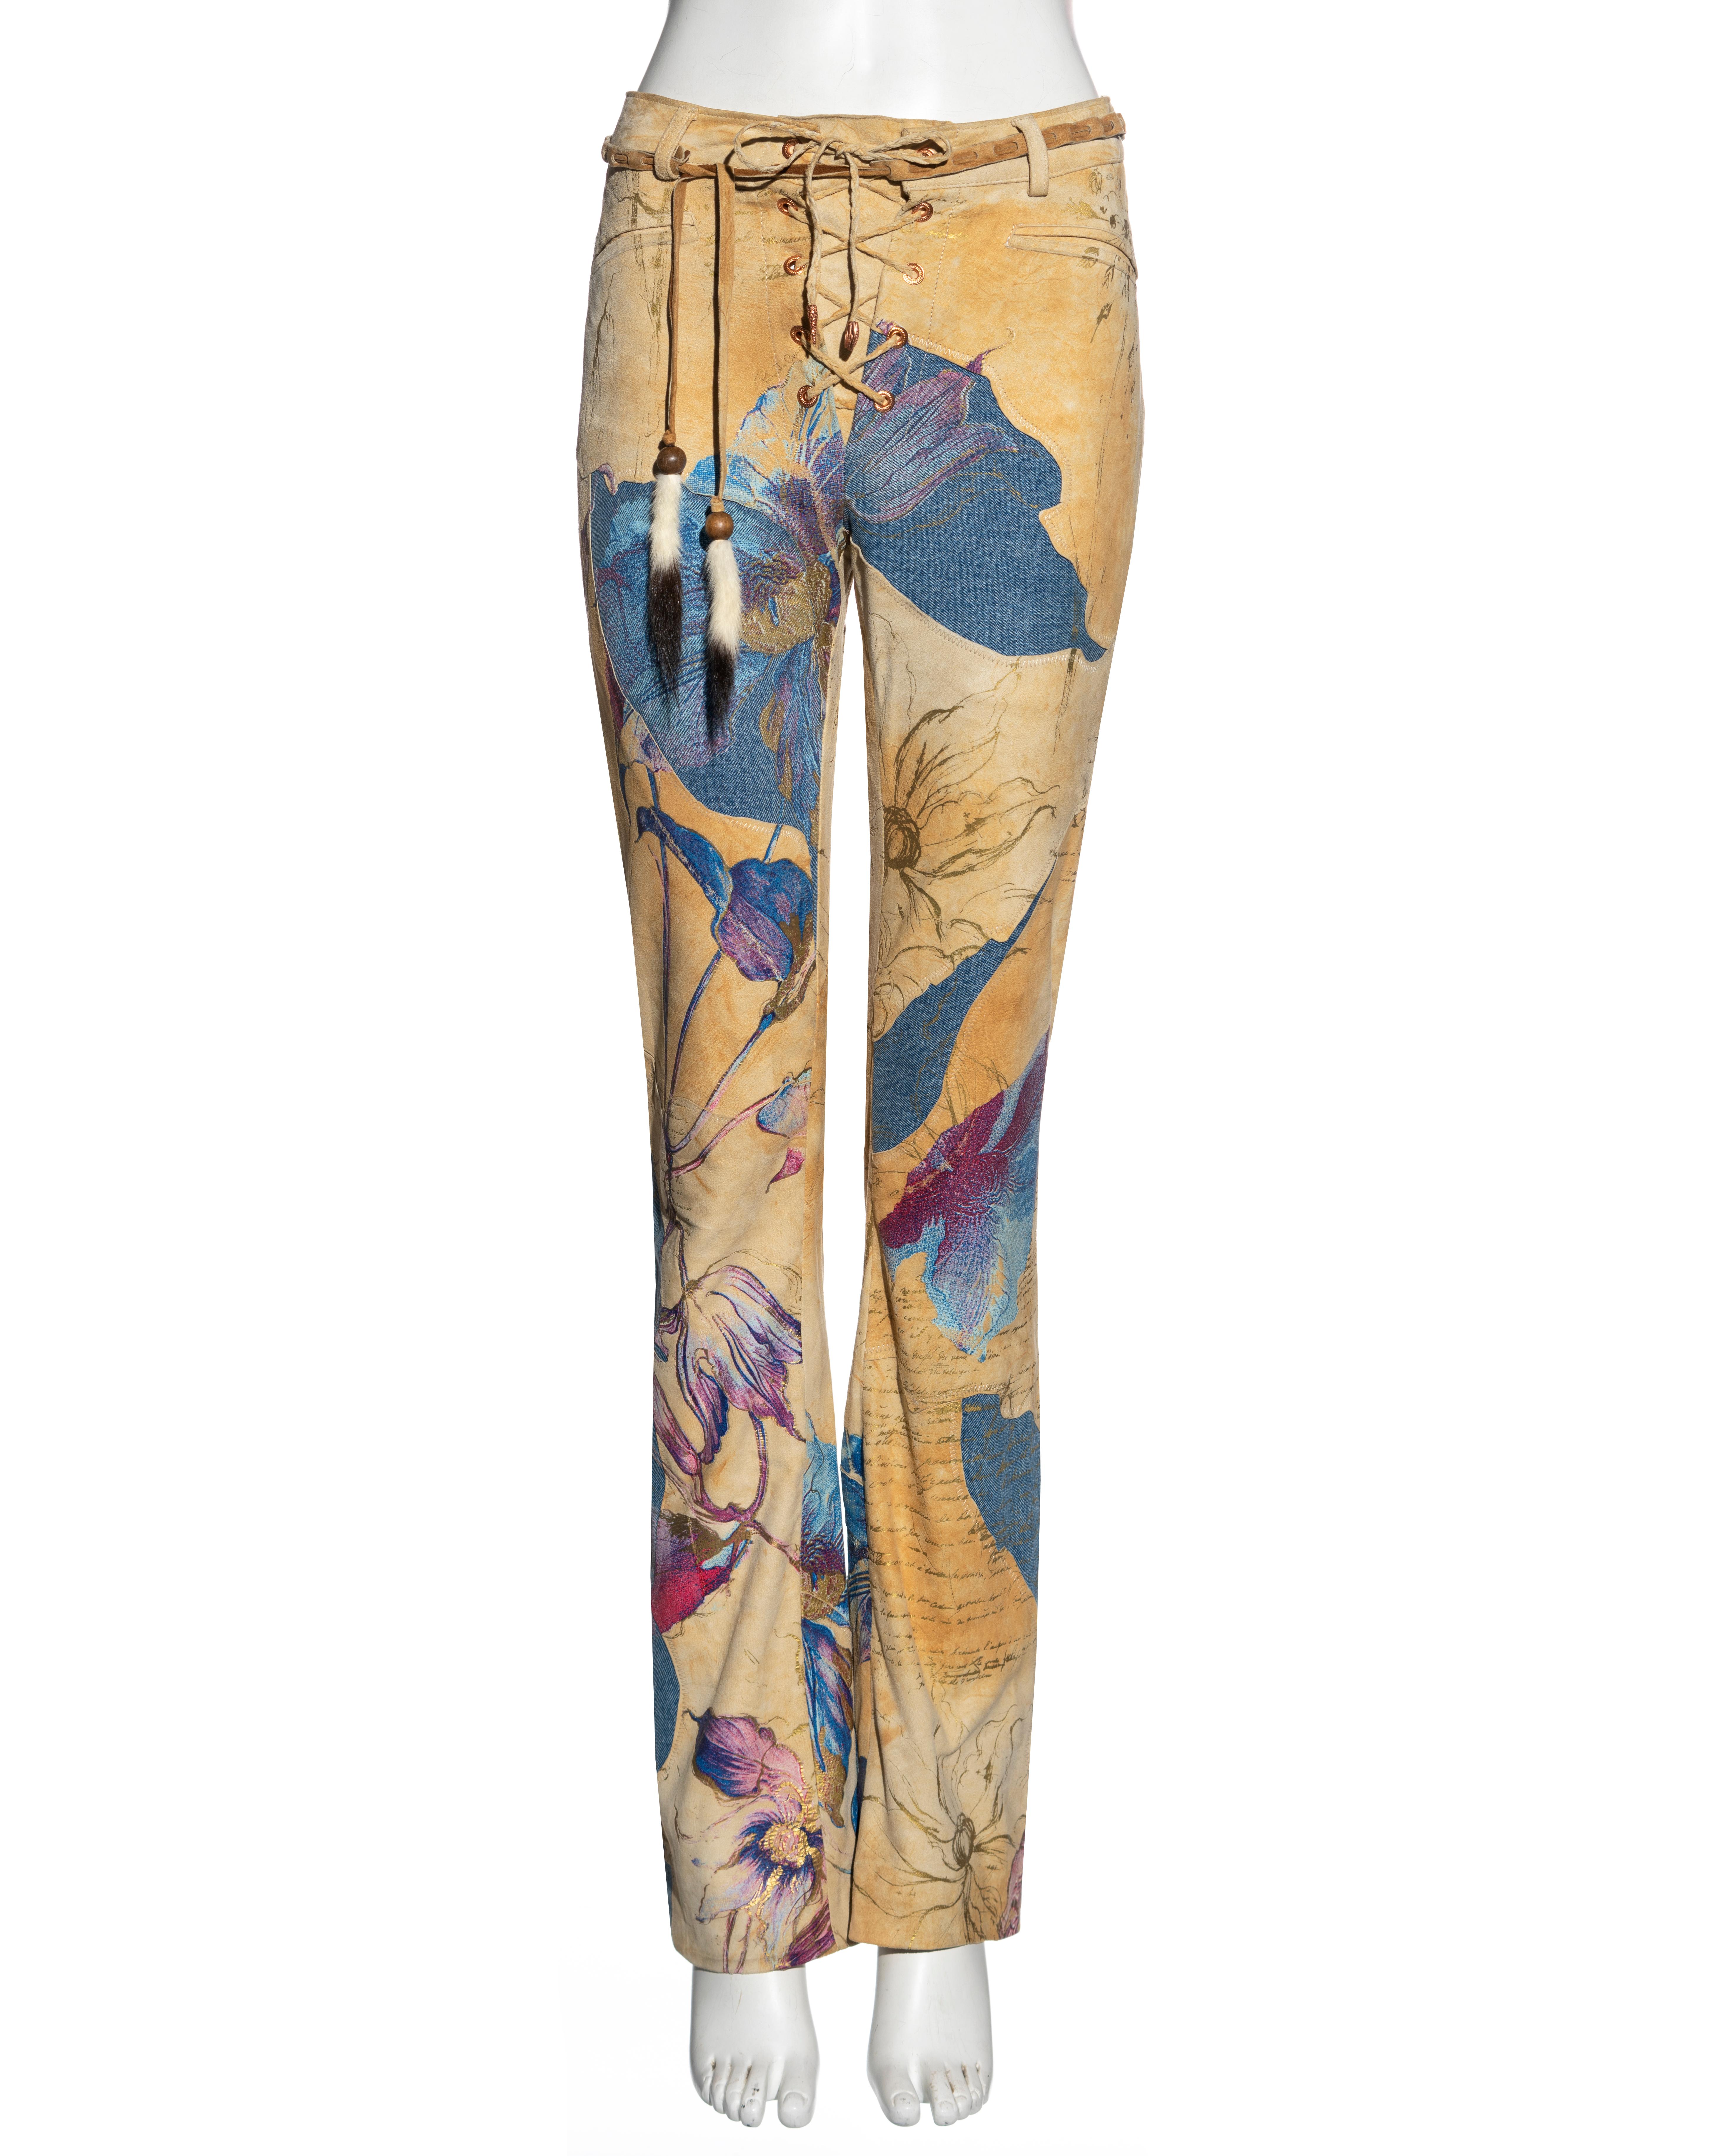 ▪ Roberto Cavalli pants 
▪ Sold by One of a Kind Archive
▪ Constructed from a patchwork of tan suede and blue denim
▪ Pink and purple floral print with gold foil overlay 
▪ Straight leg 
▪ Lace up and belt fastenings with mink fur
▪ Size: Small
▪